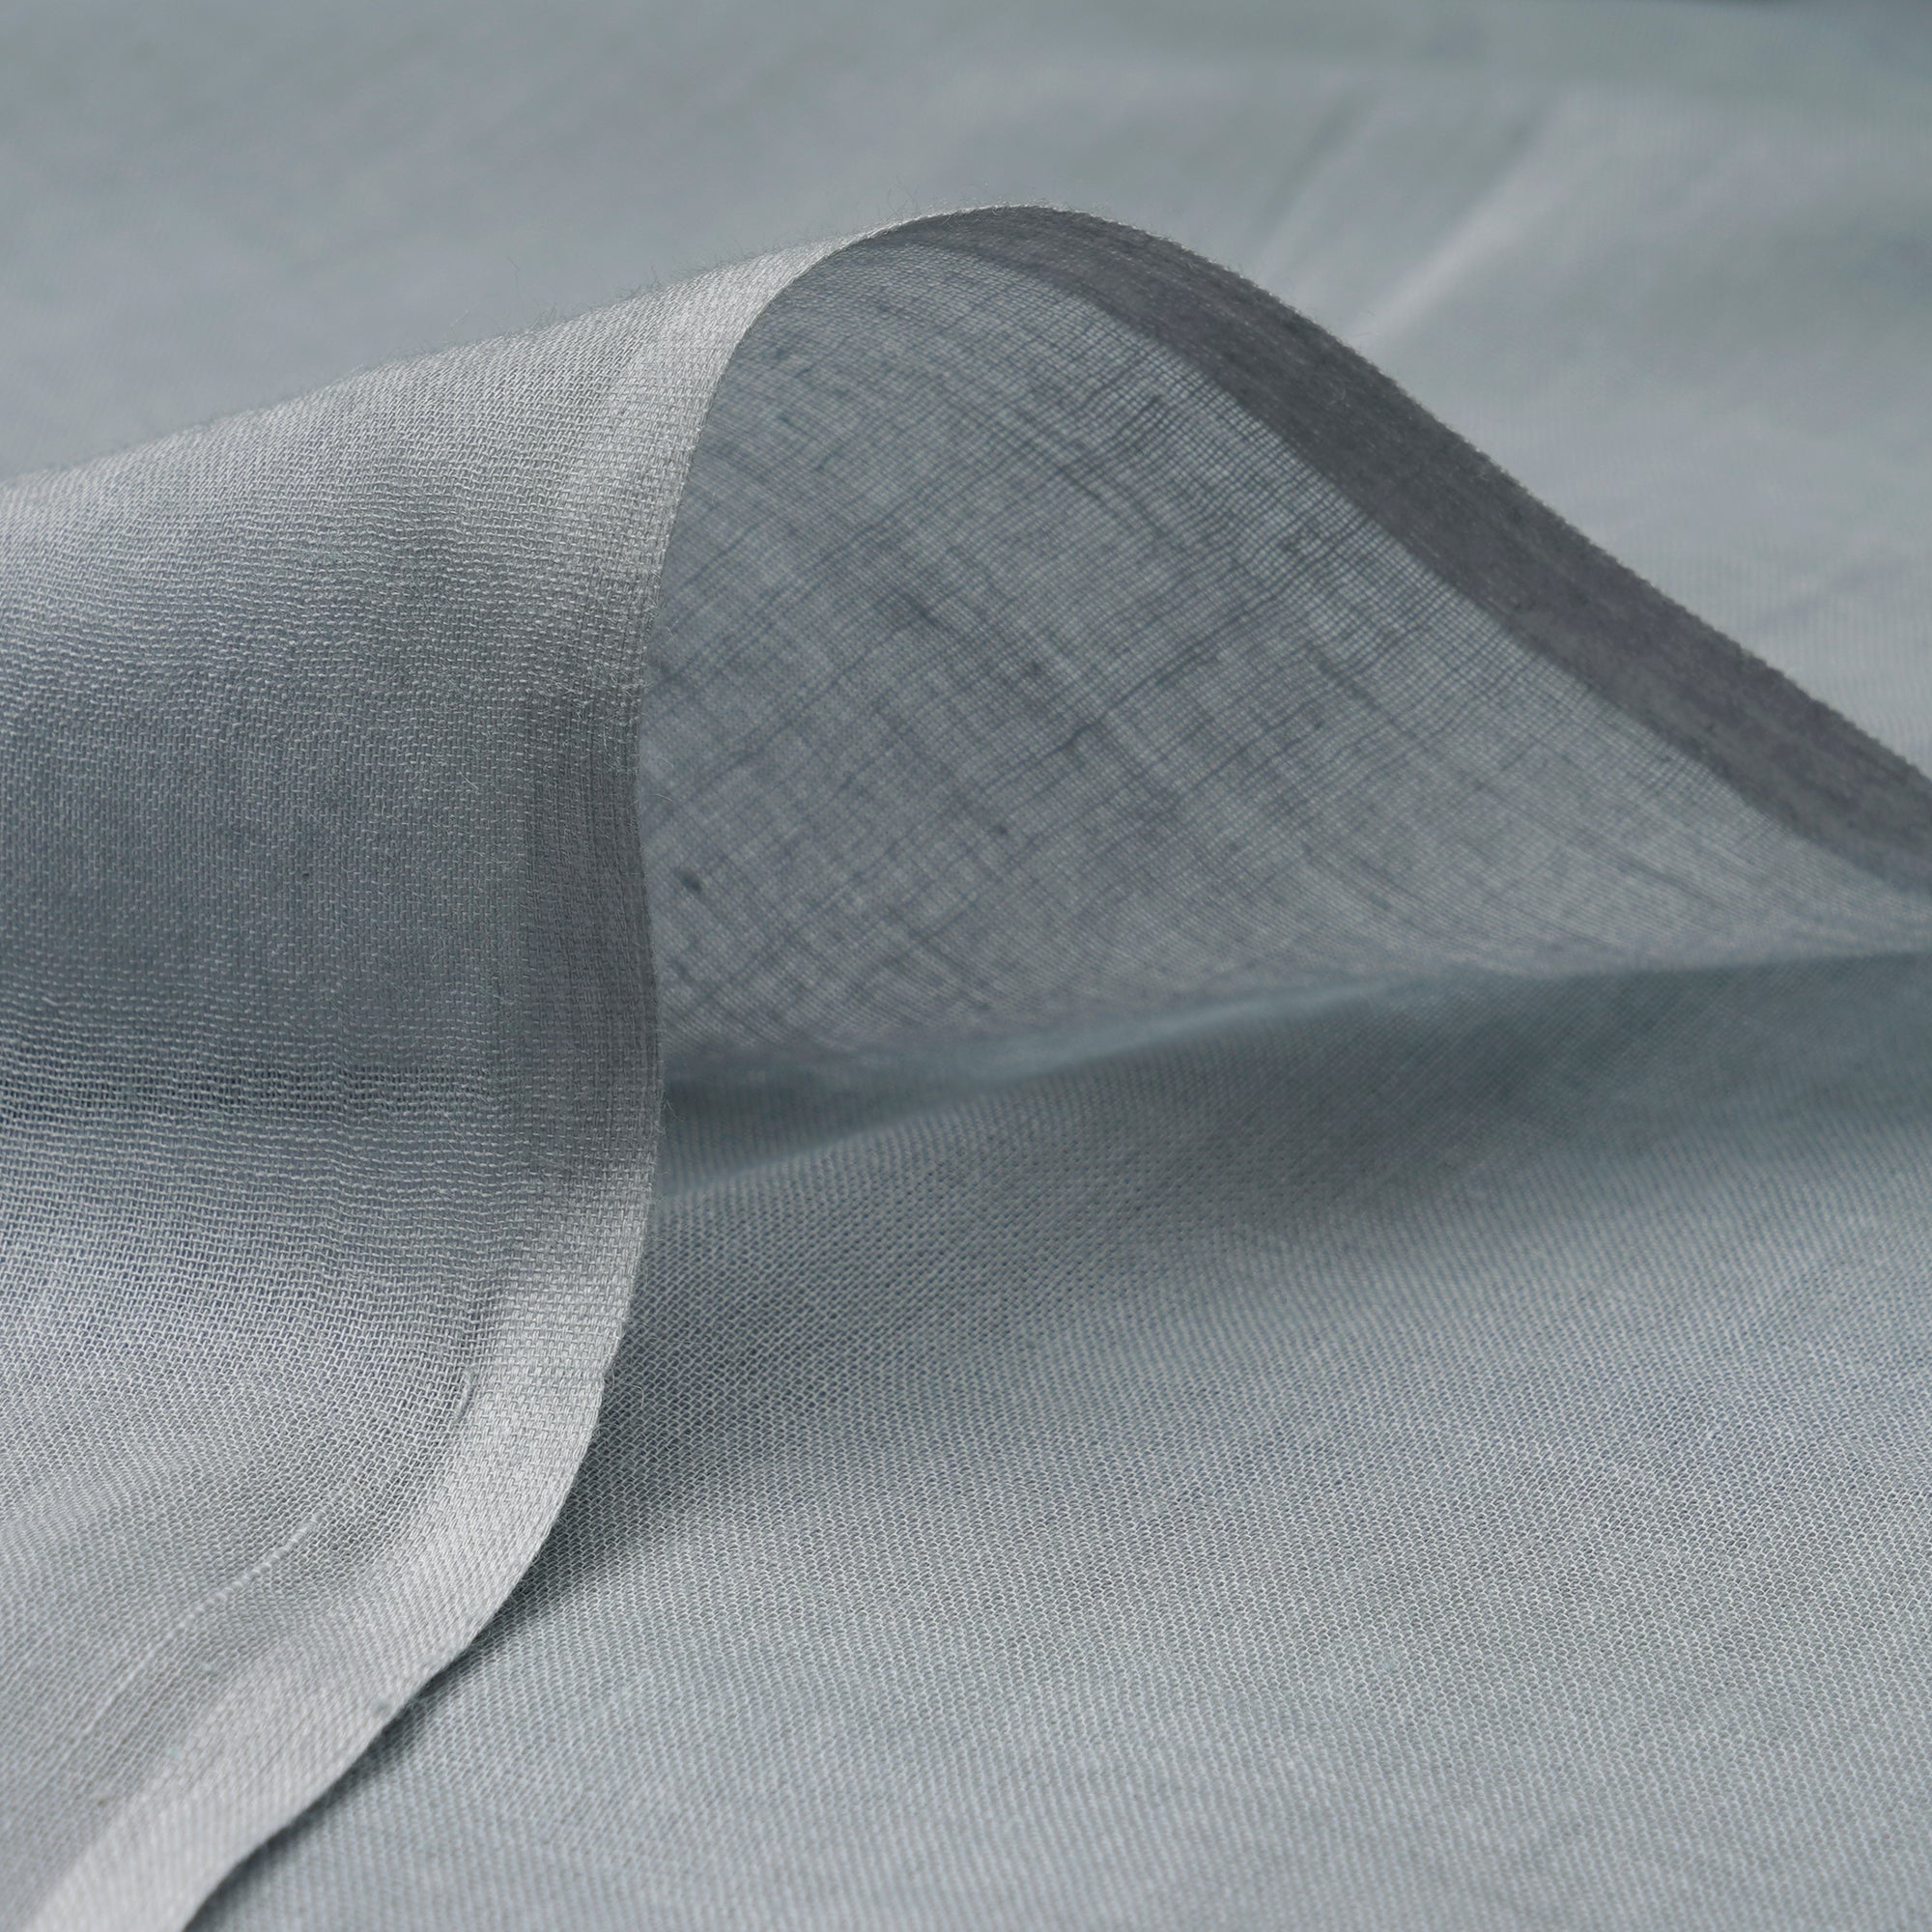 Hige Rise Cotton Voile Fabric